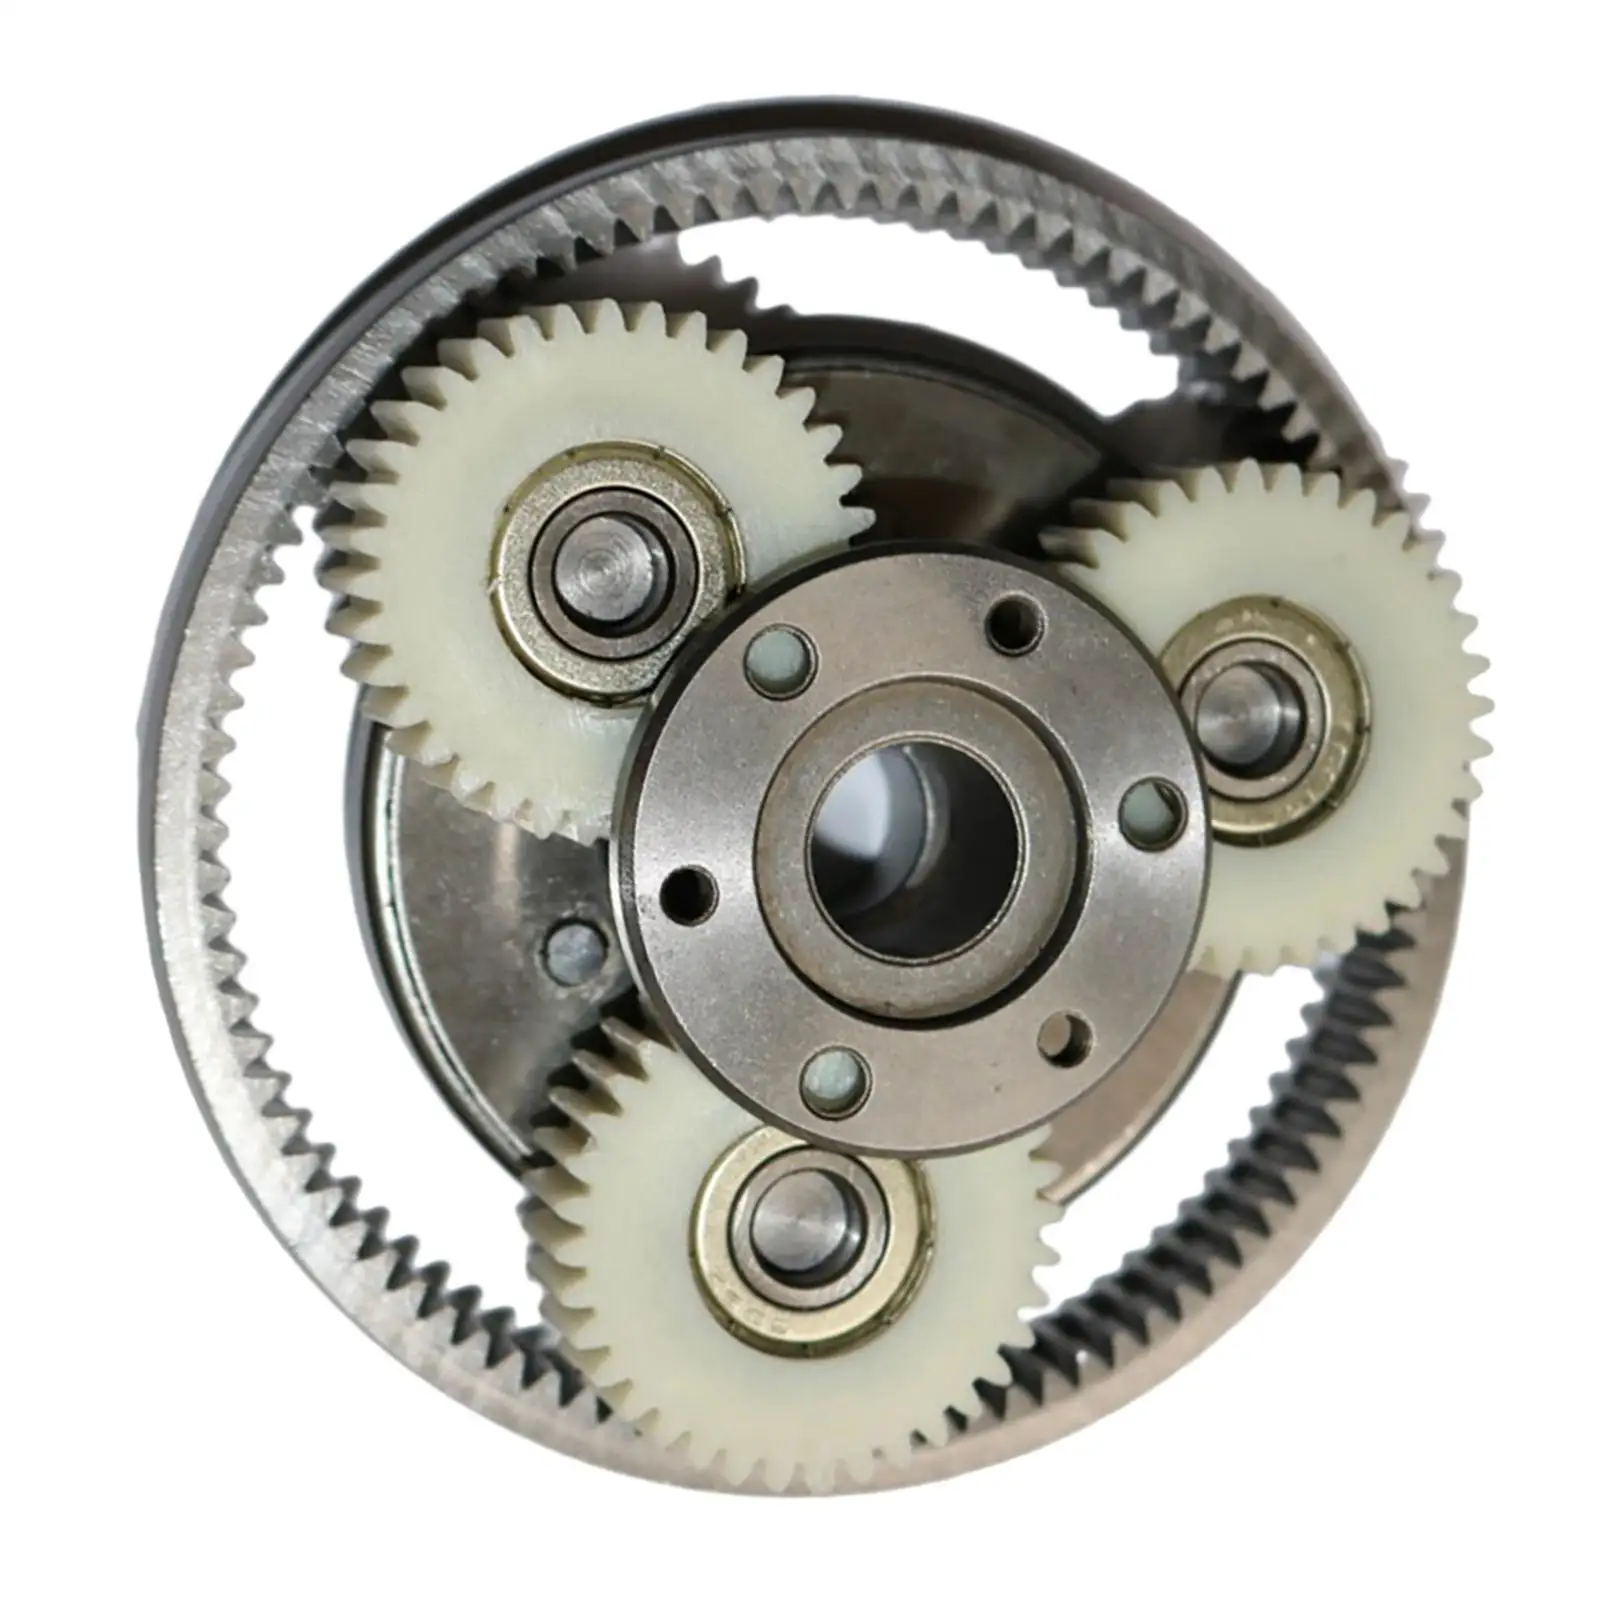  Parts 36T Planetary Gear with Clutch 36mm Thickness:11mm  Gear Set for Bicycle Motor  Electric Bike